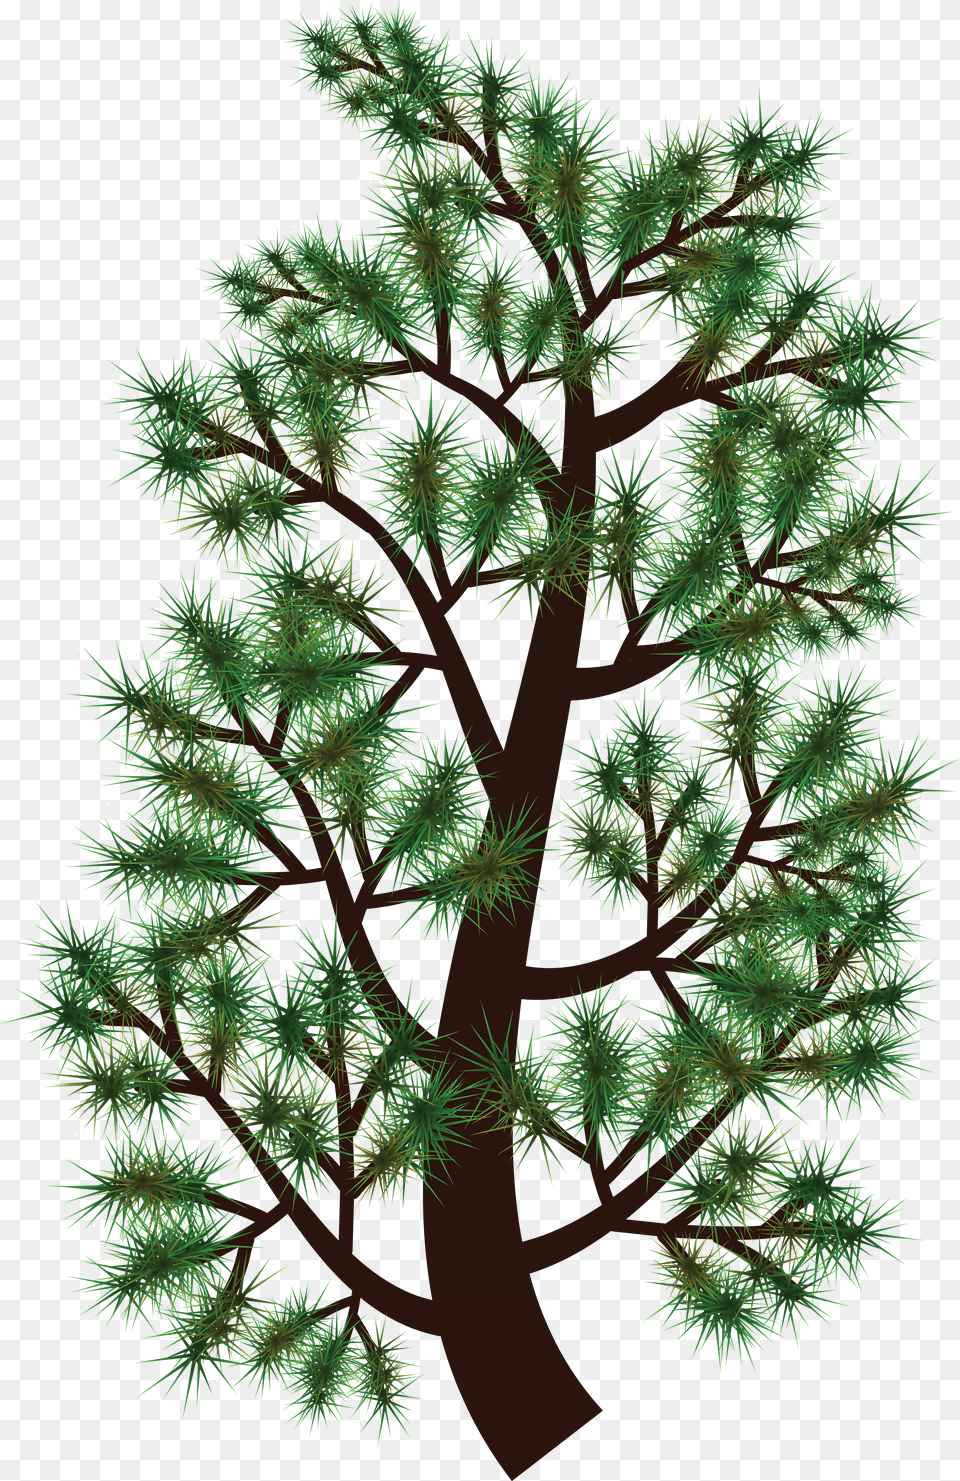 Free Clipart Of A Pine Tree Branch Clip Art Png Image